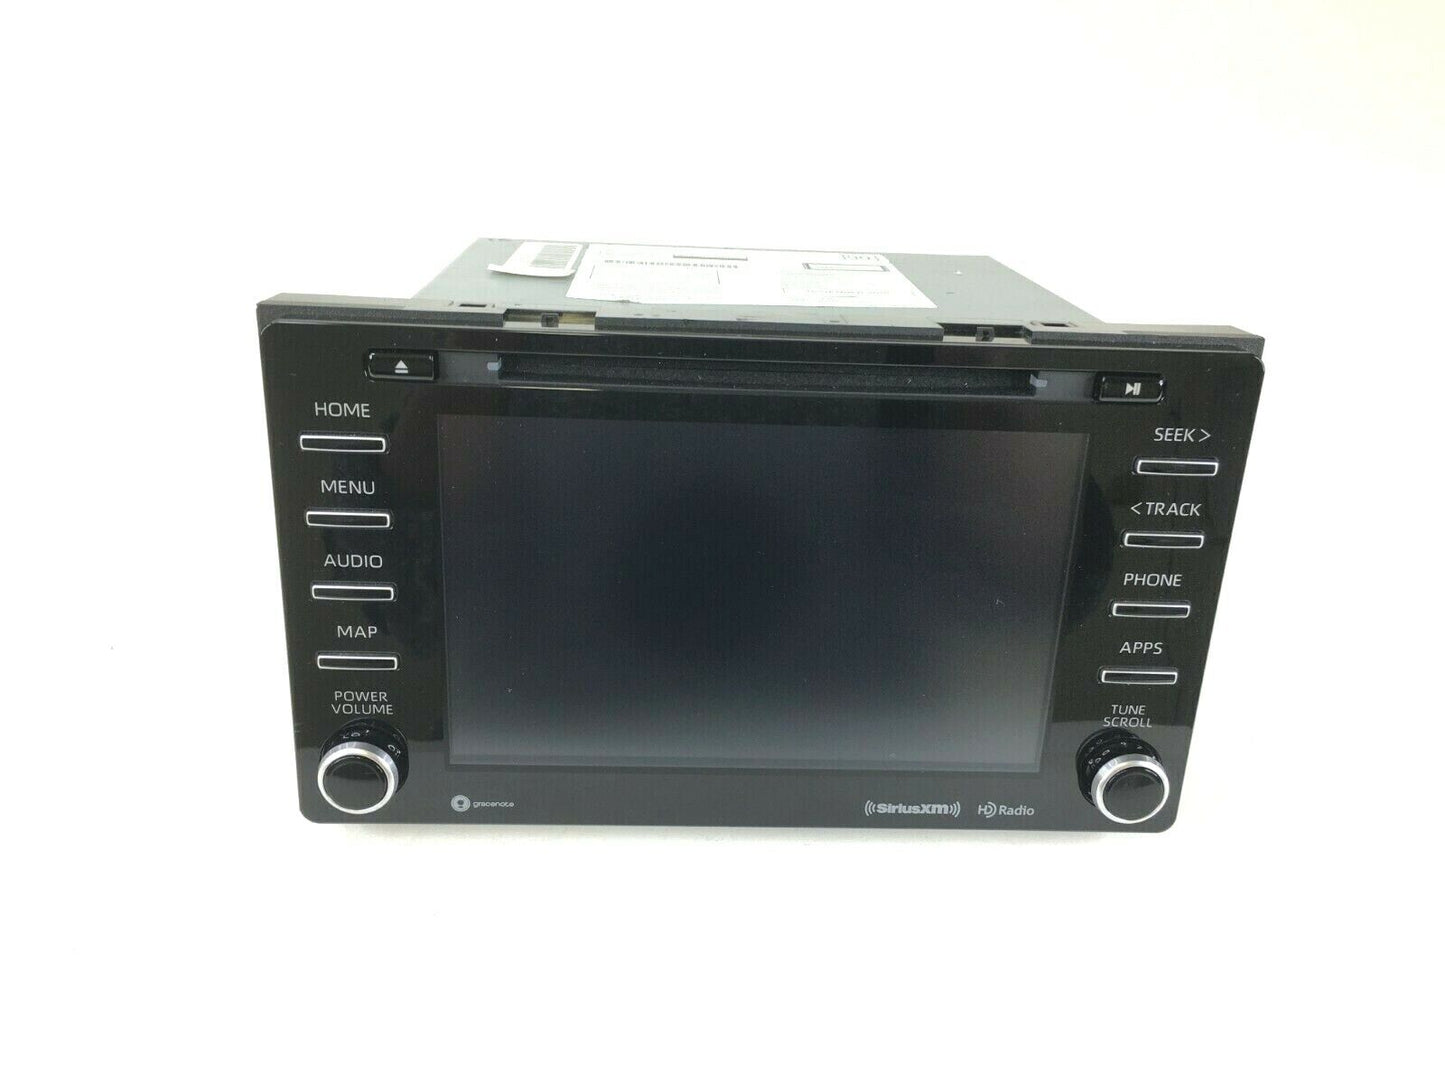 2019-2020 TOYOTA SIENNA A/V Equipment receiver display 86140-08190-Tested;works